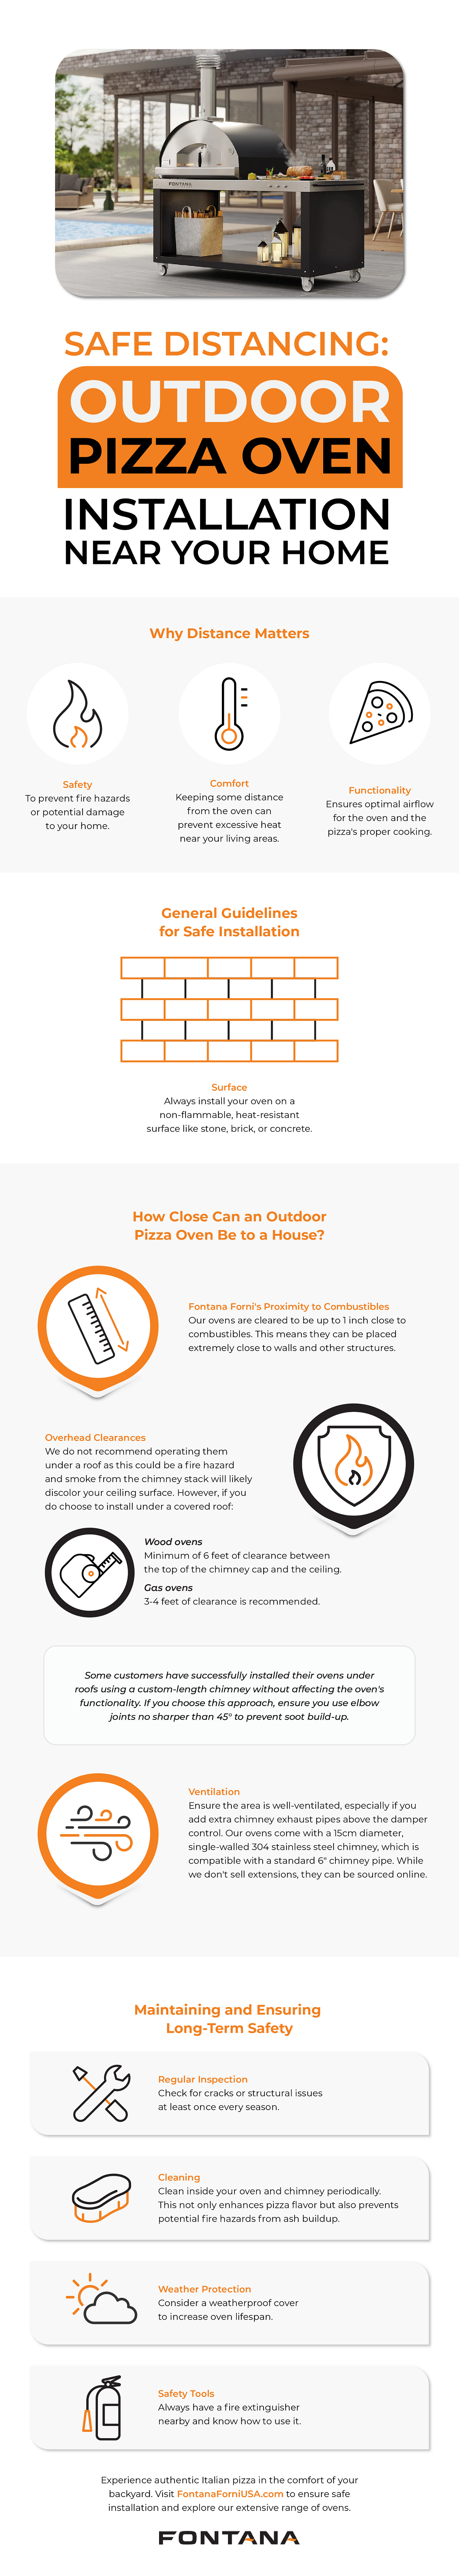 Safe Distancing for an Outdoor Pizza Oven Infographic